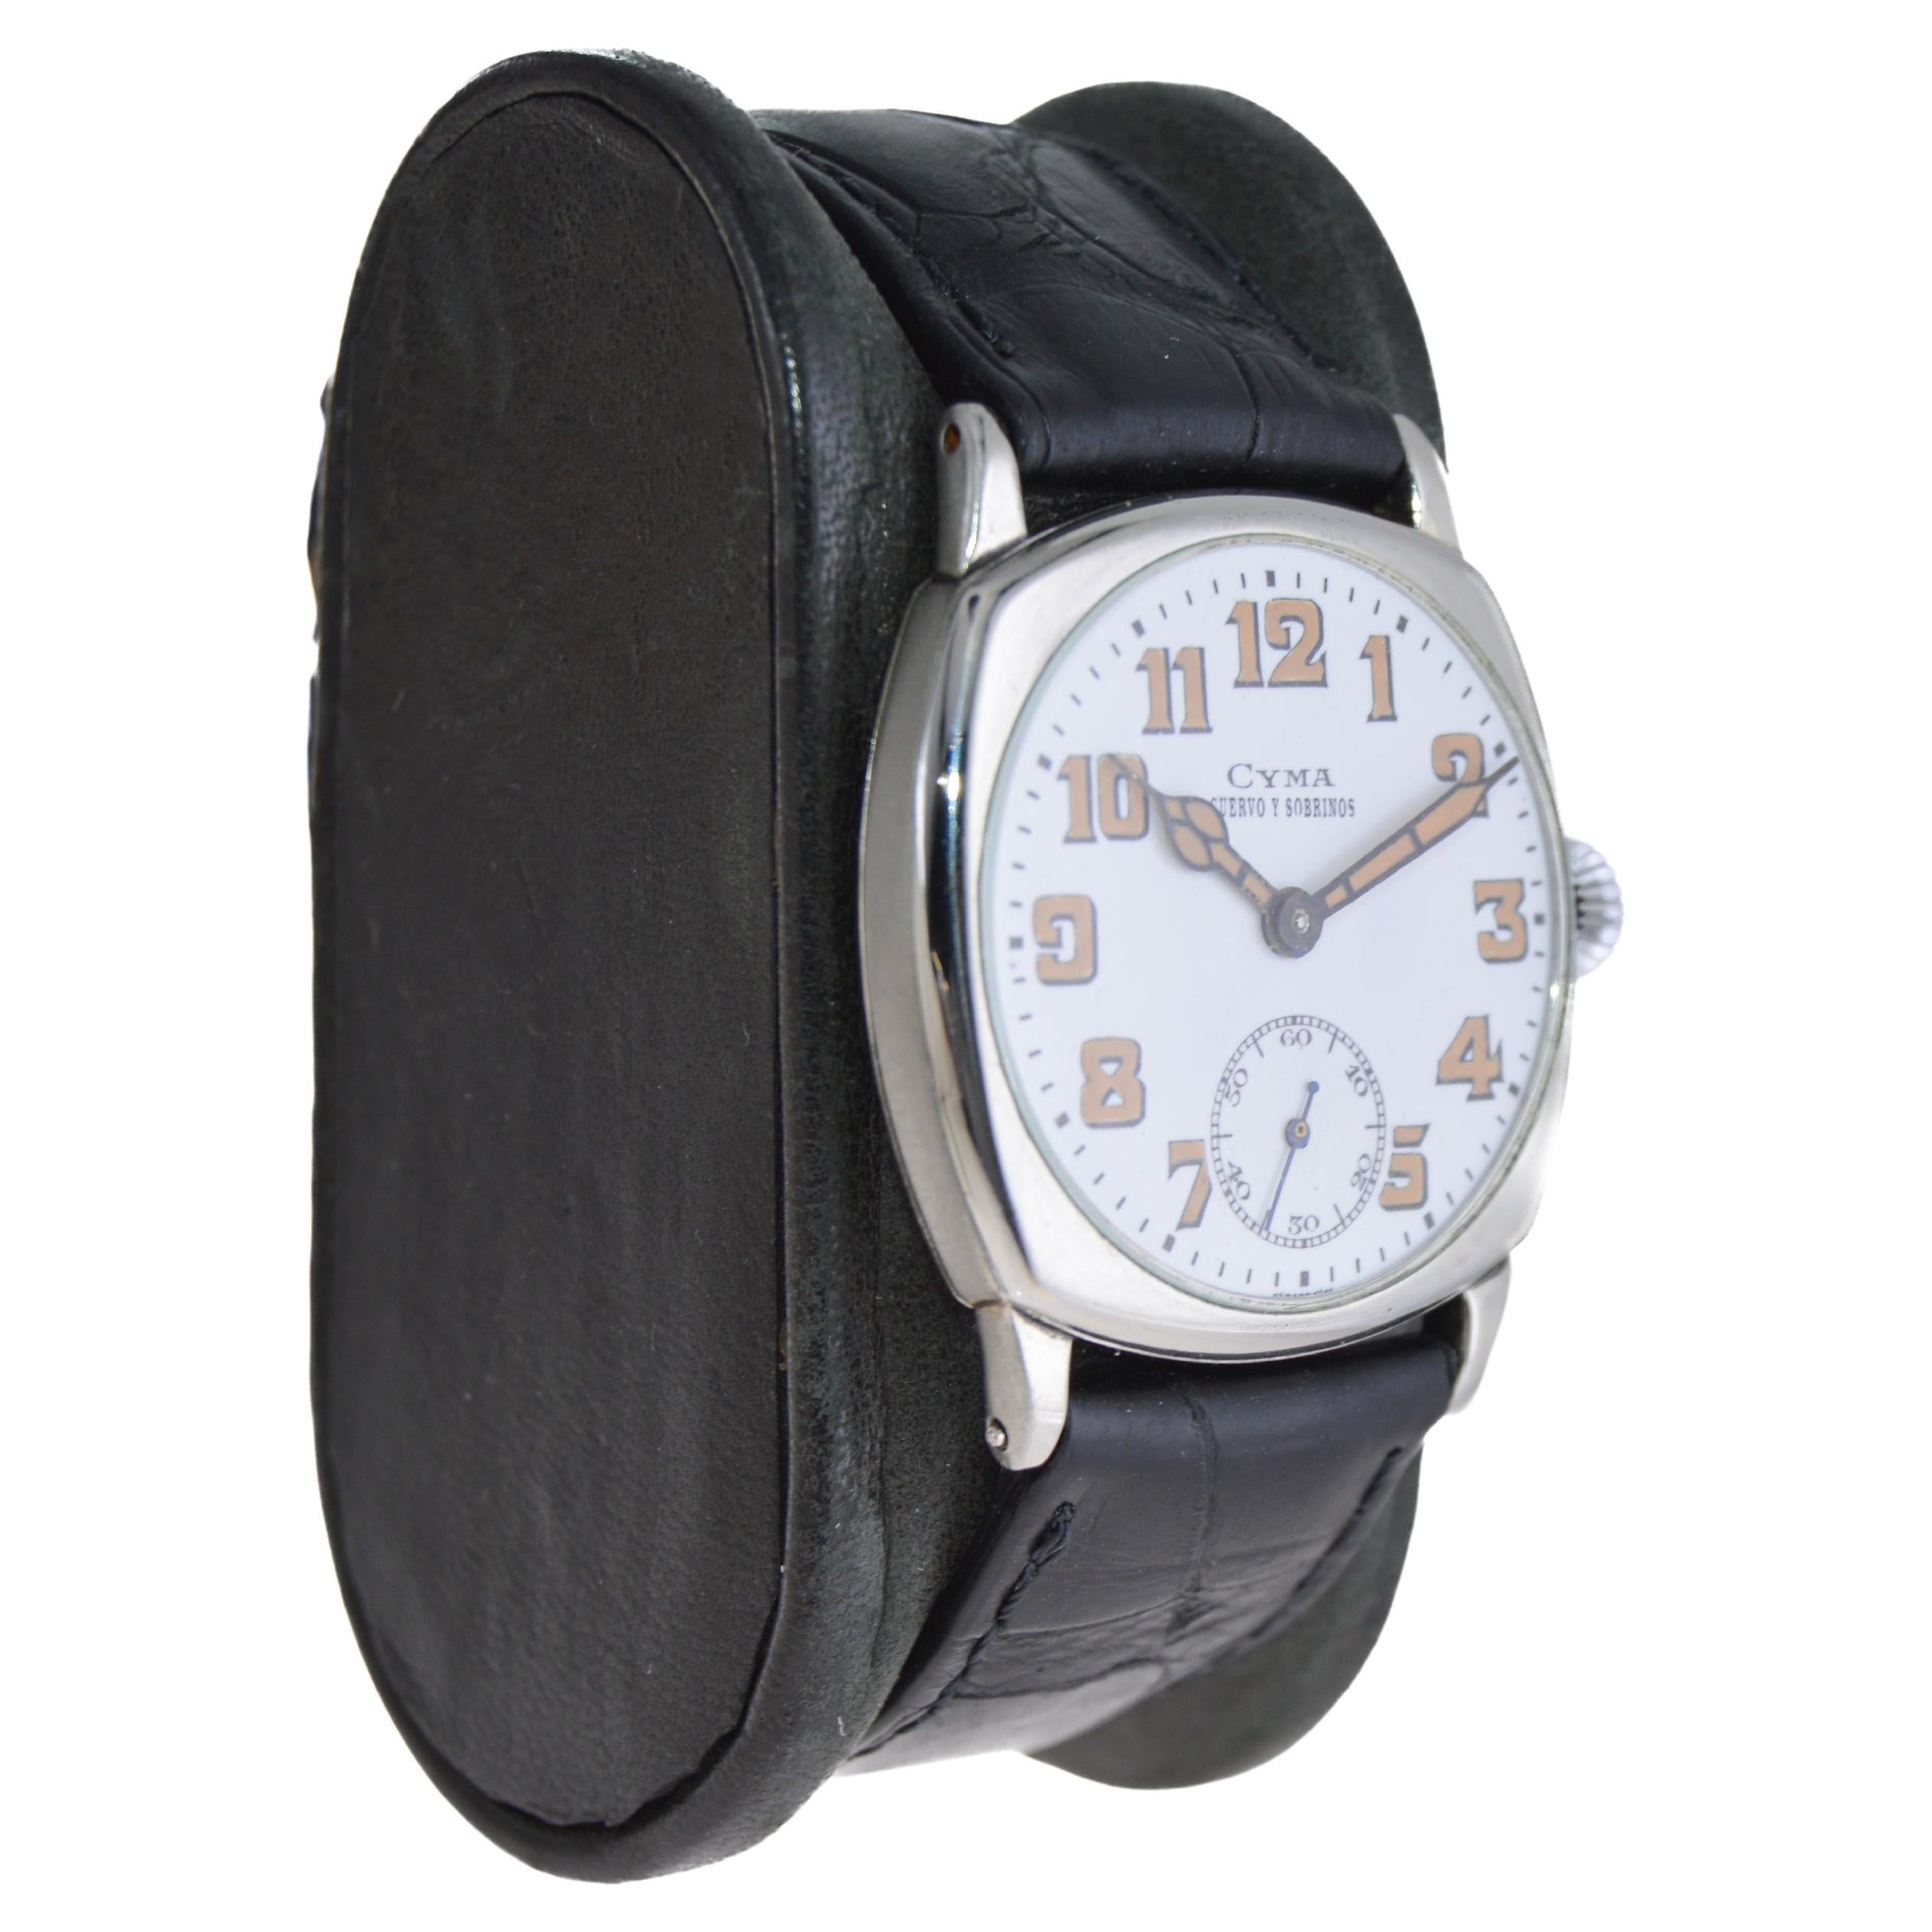 FACTORY / HOUSE: Cyma Watch Company for Cuervo & Sobrinos
STYLE / REFERENCE: Art Deco Cushion Shape 
METAL / MATERIAL: Nickel Silver
CIRCA / YEAR: 1920's
DIMENSIONS / SIZE: 38mm Length X 32mm Width
MOVEMENT / CALIBER: Manual Winding 
DIAL / HANDS: